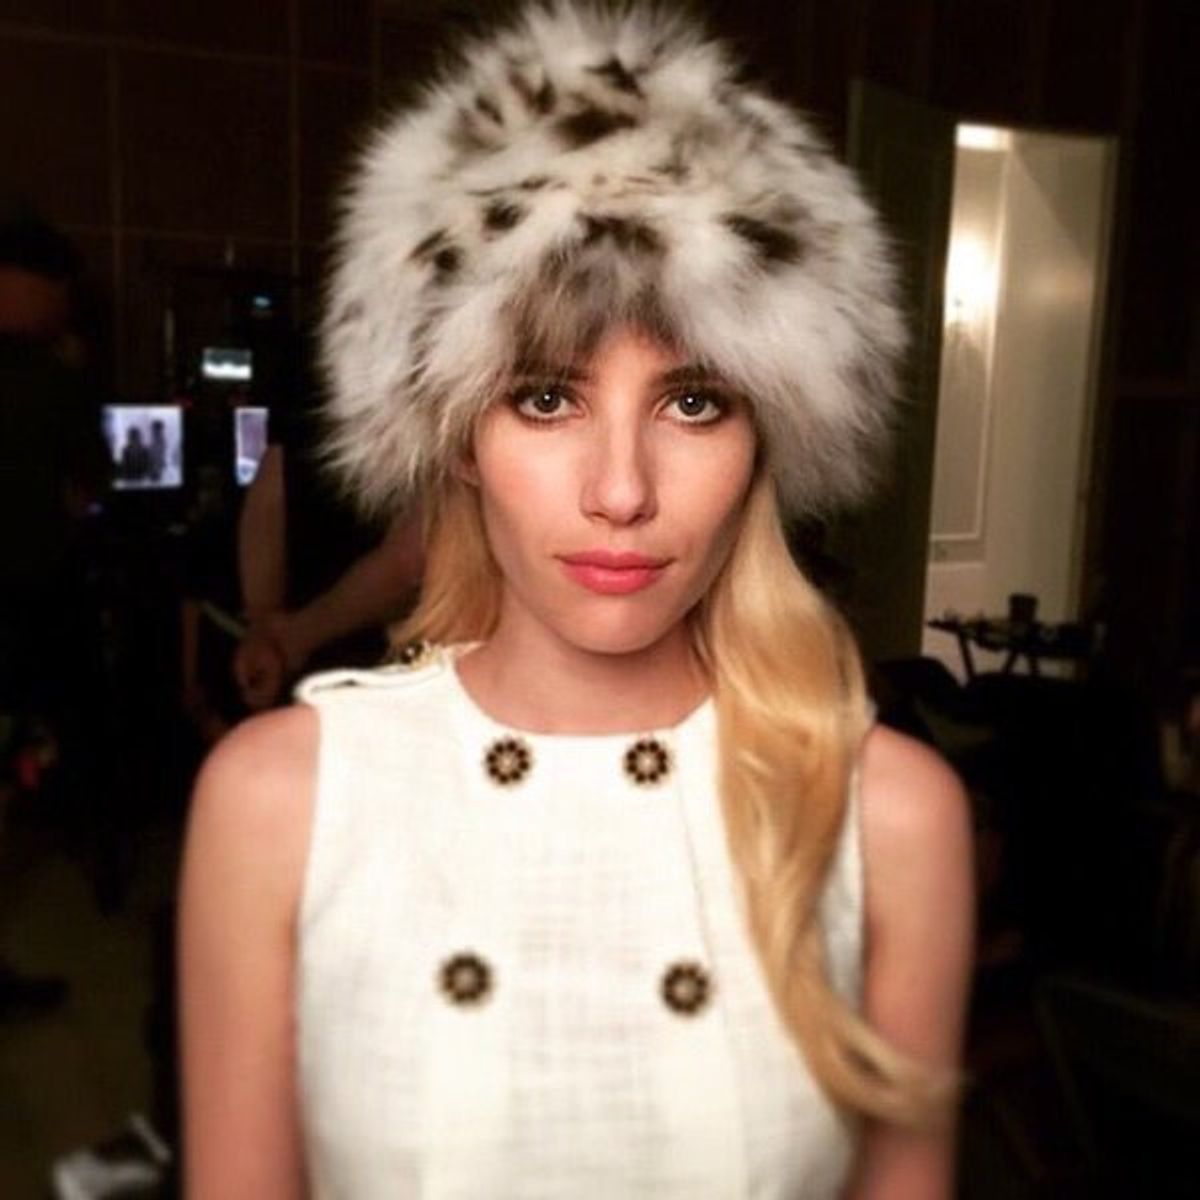 20 Reasons Why Chanel From Scream Queens Is The Total It Girl